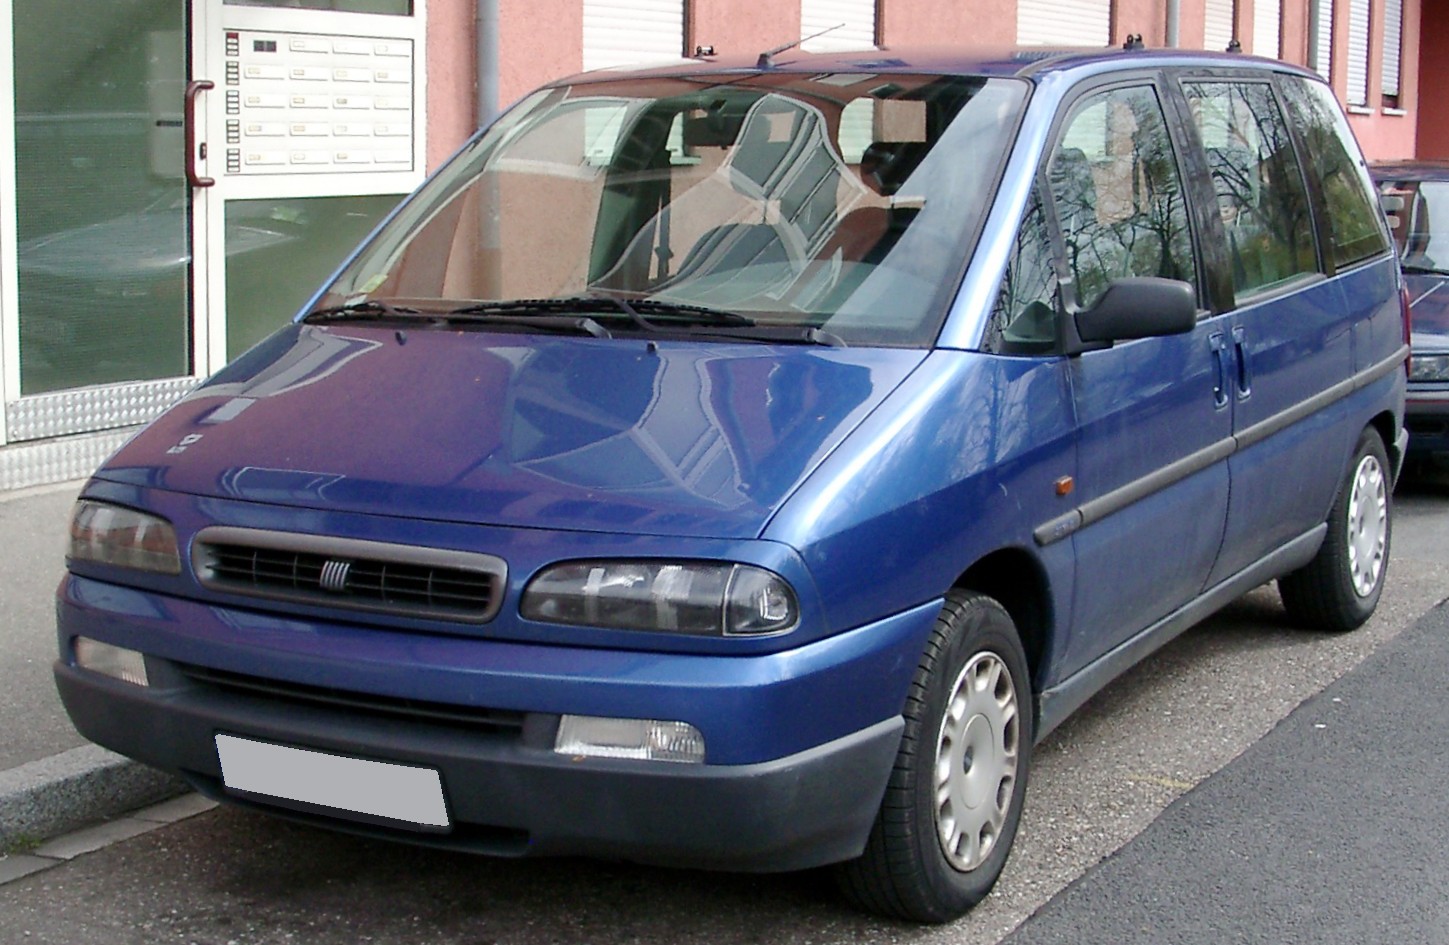 Fiat Ulysse I 1994 - 1998 Compact Mpv :: Outstanding Cars